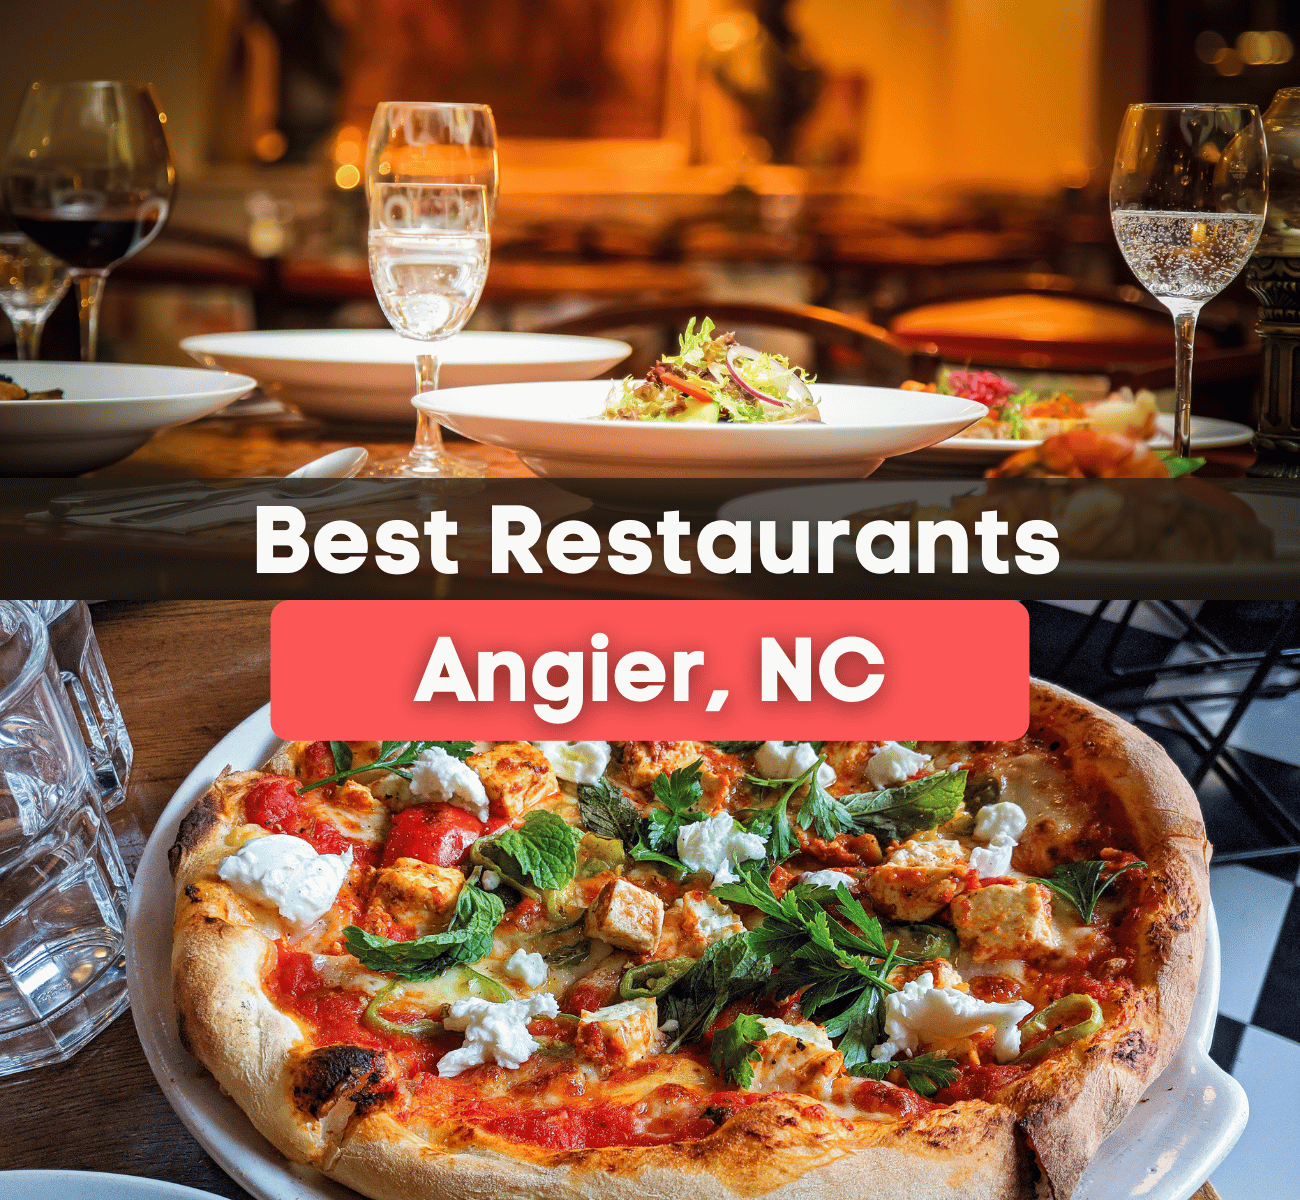 best restaurants in Angier, NC graphic with fresh pizza and restaurant with dishes and wine glasses